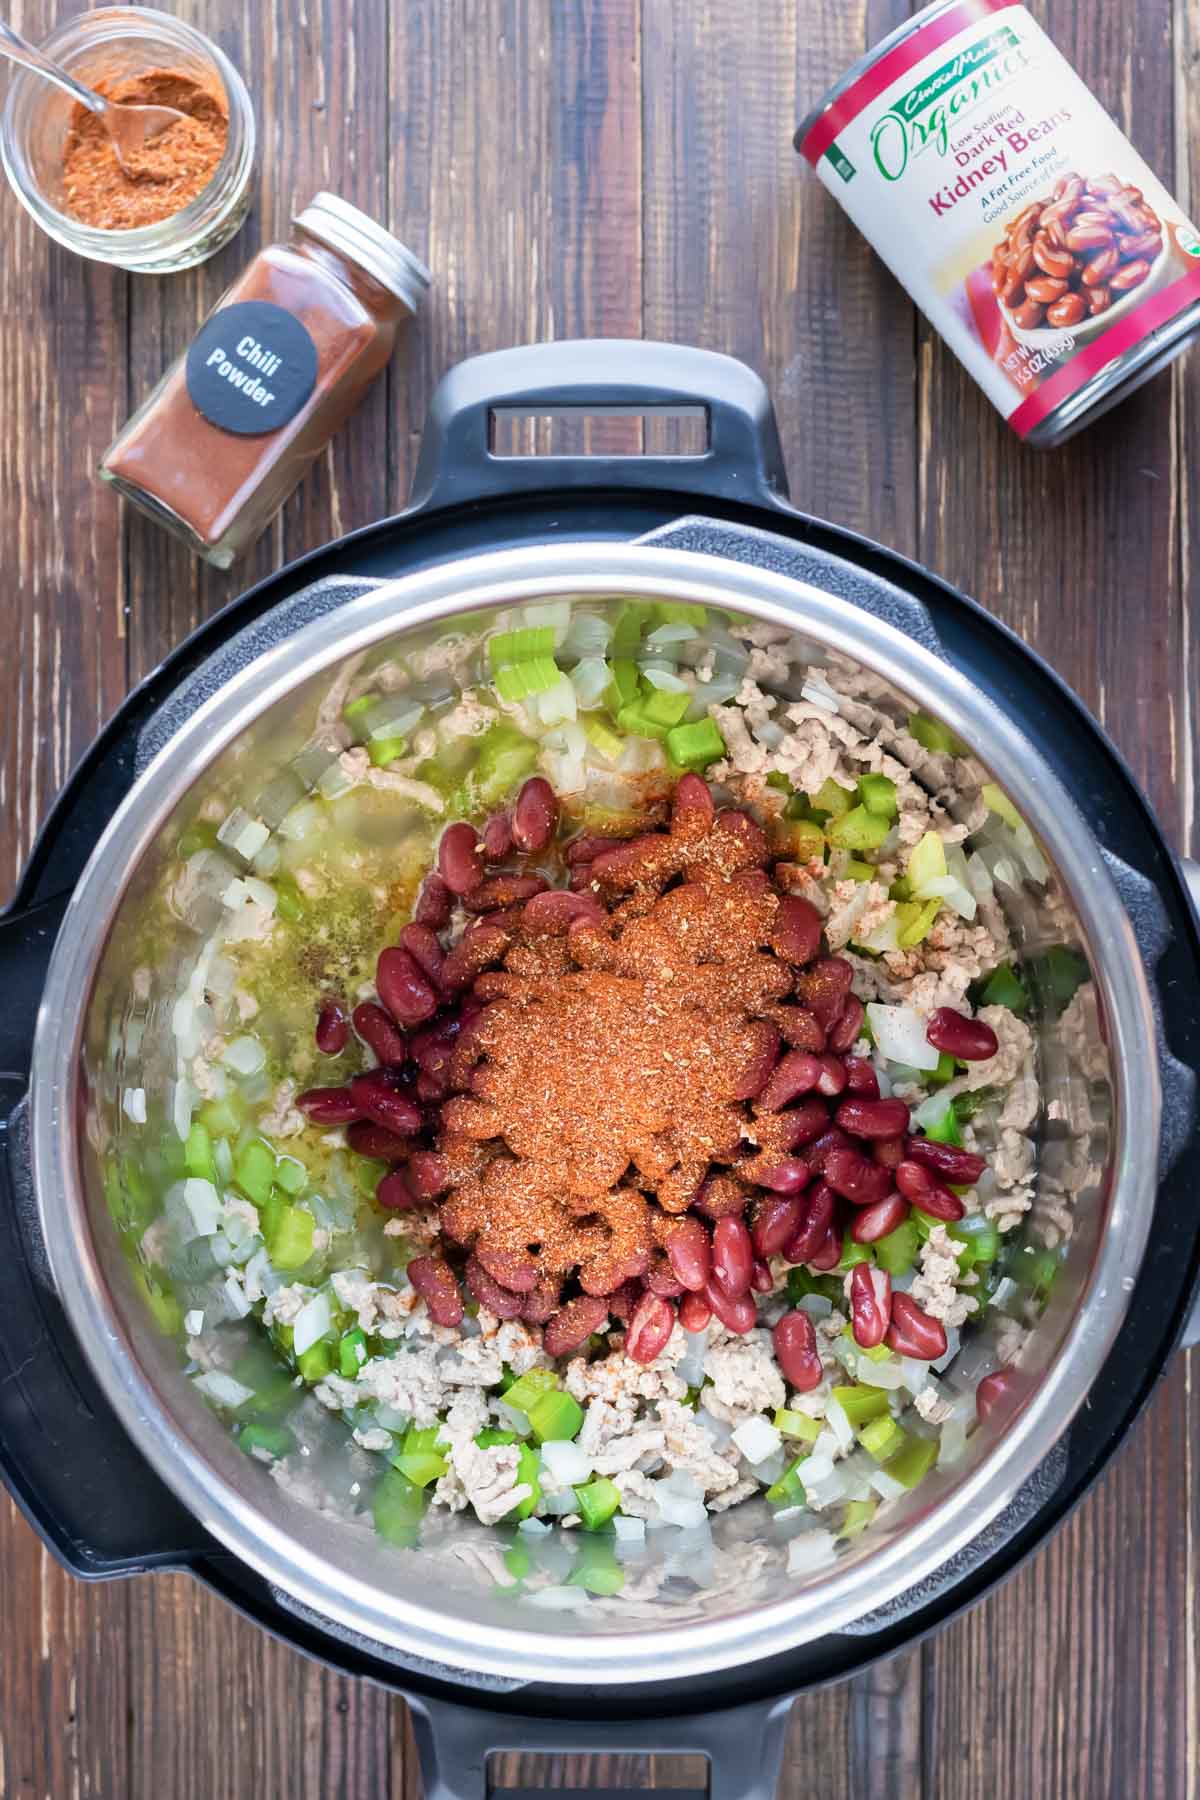 Seasoning and beans are combined in an Instant Pot with other ingredients.